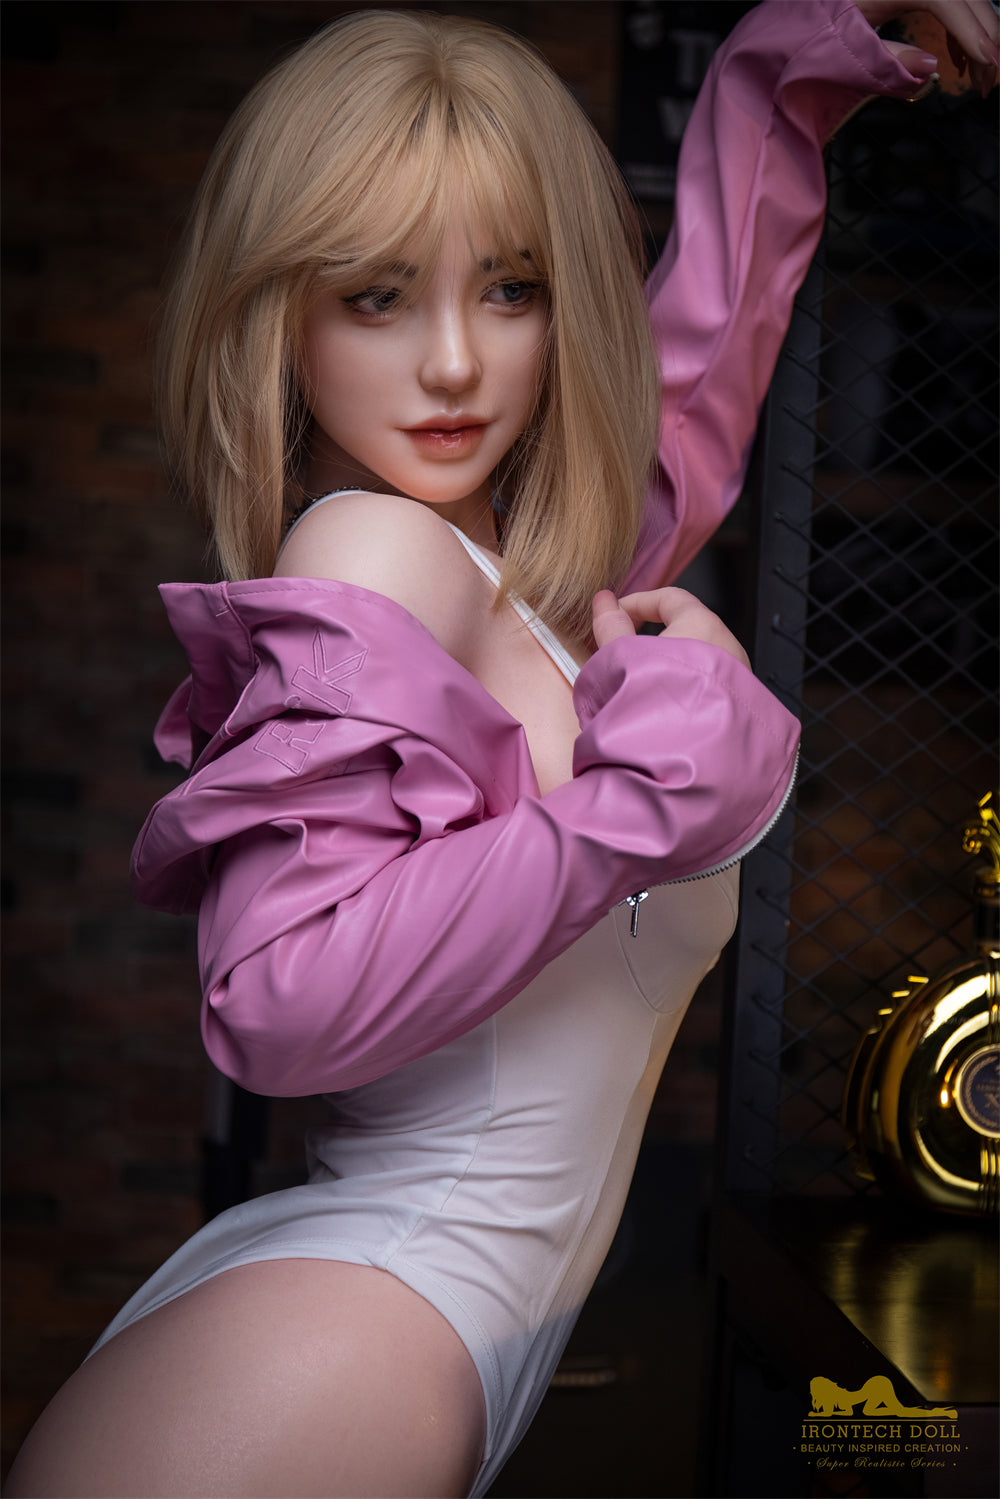 Irontechdoll Nicolette 169cm Full Silicone Love Doll S39 Realistic Adult Sex Doll Natural Skin